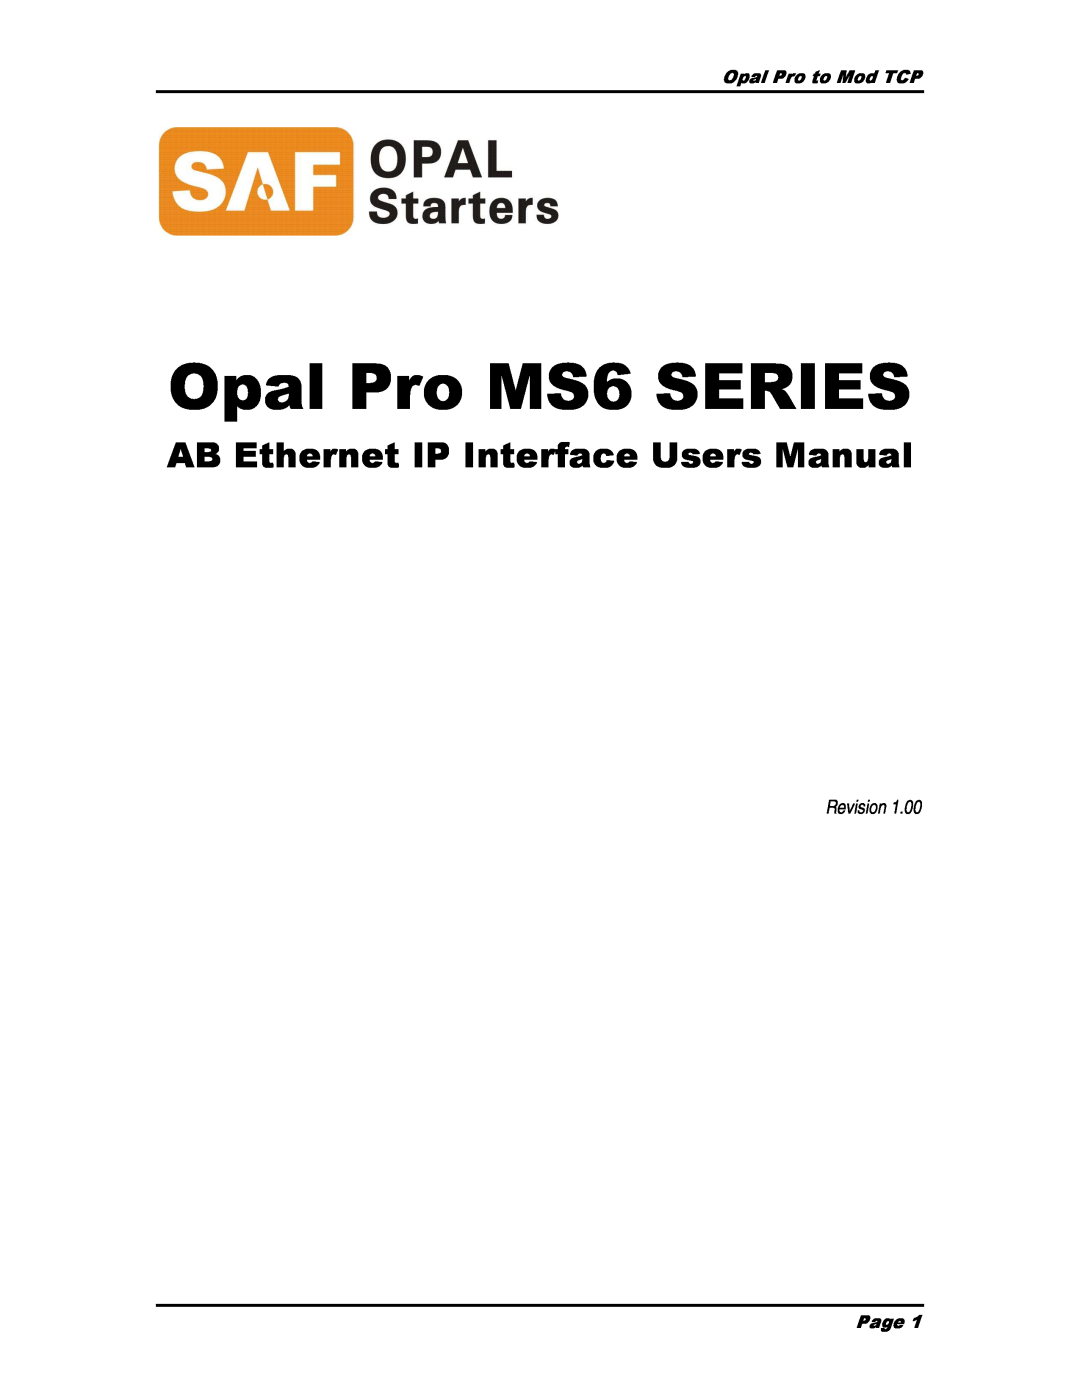 AB Soft user manual Opal Pro MS6 SERIES, AB Ethernet IP Interface Users Manual, Revision, Opal Pro to Mod TCP, Page 